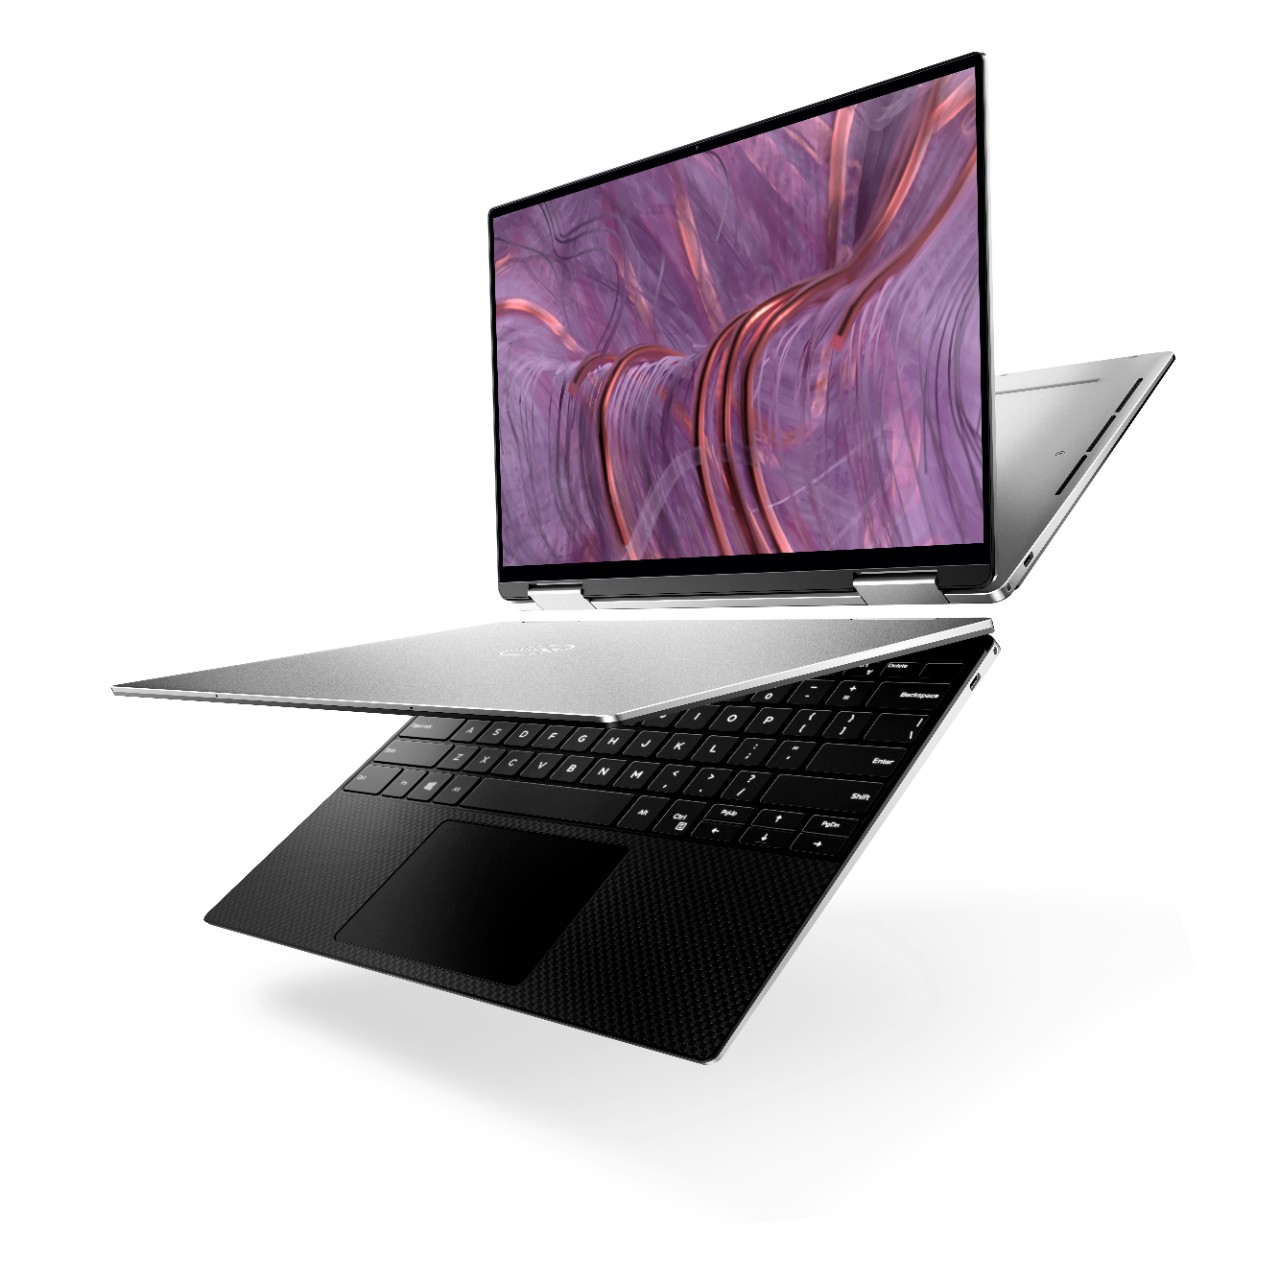 Dell XPS 13 9310 2-in-1 gets refreshed to include Intel Tiger Lake 